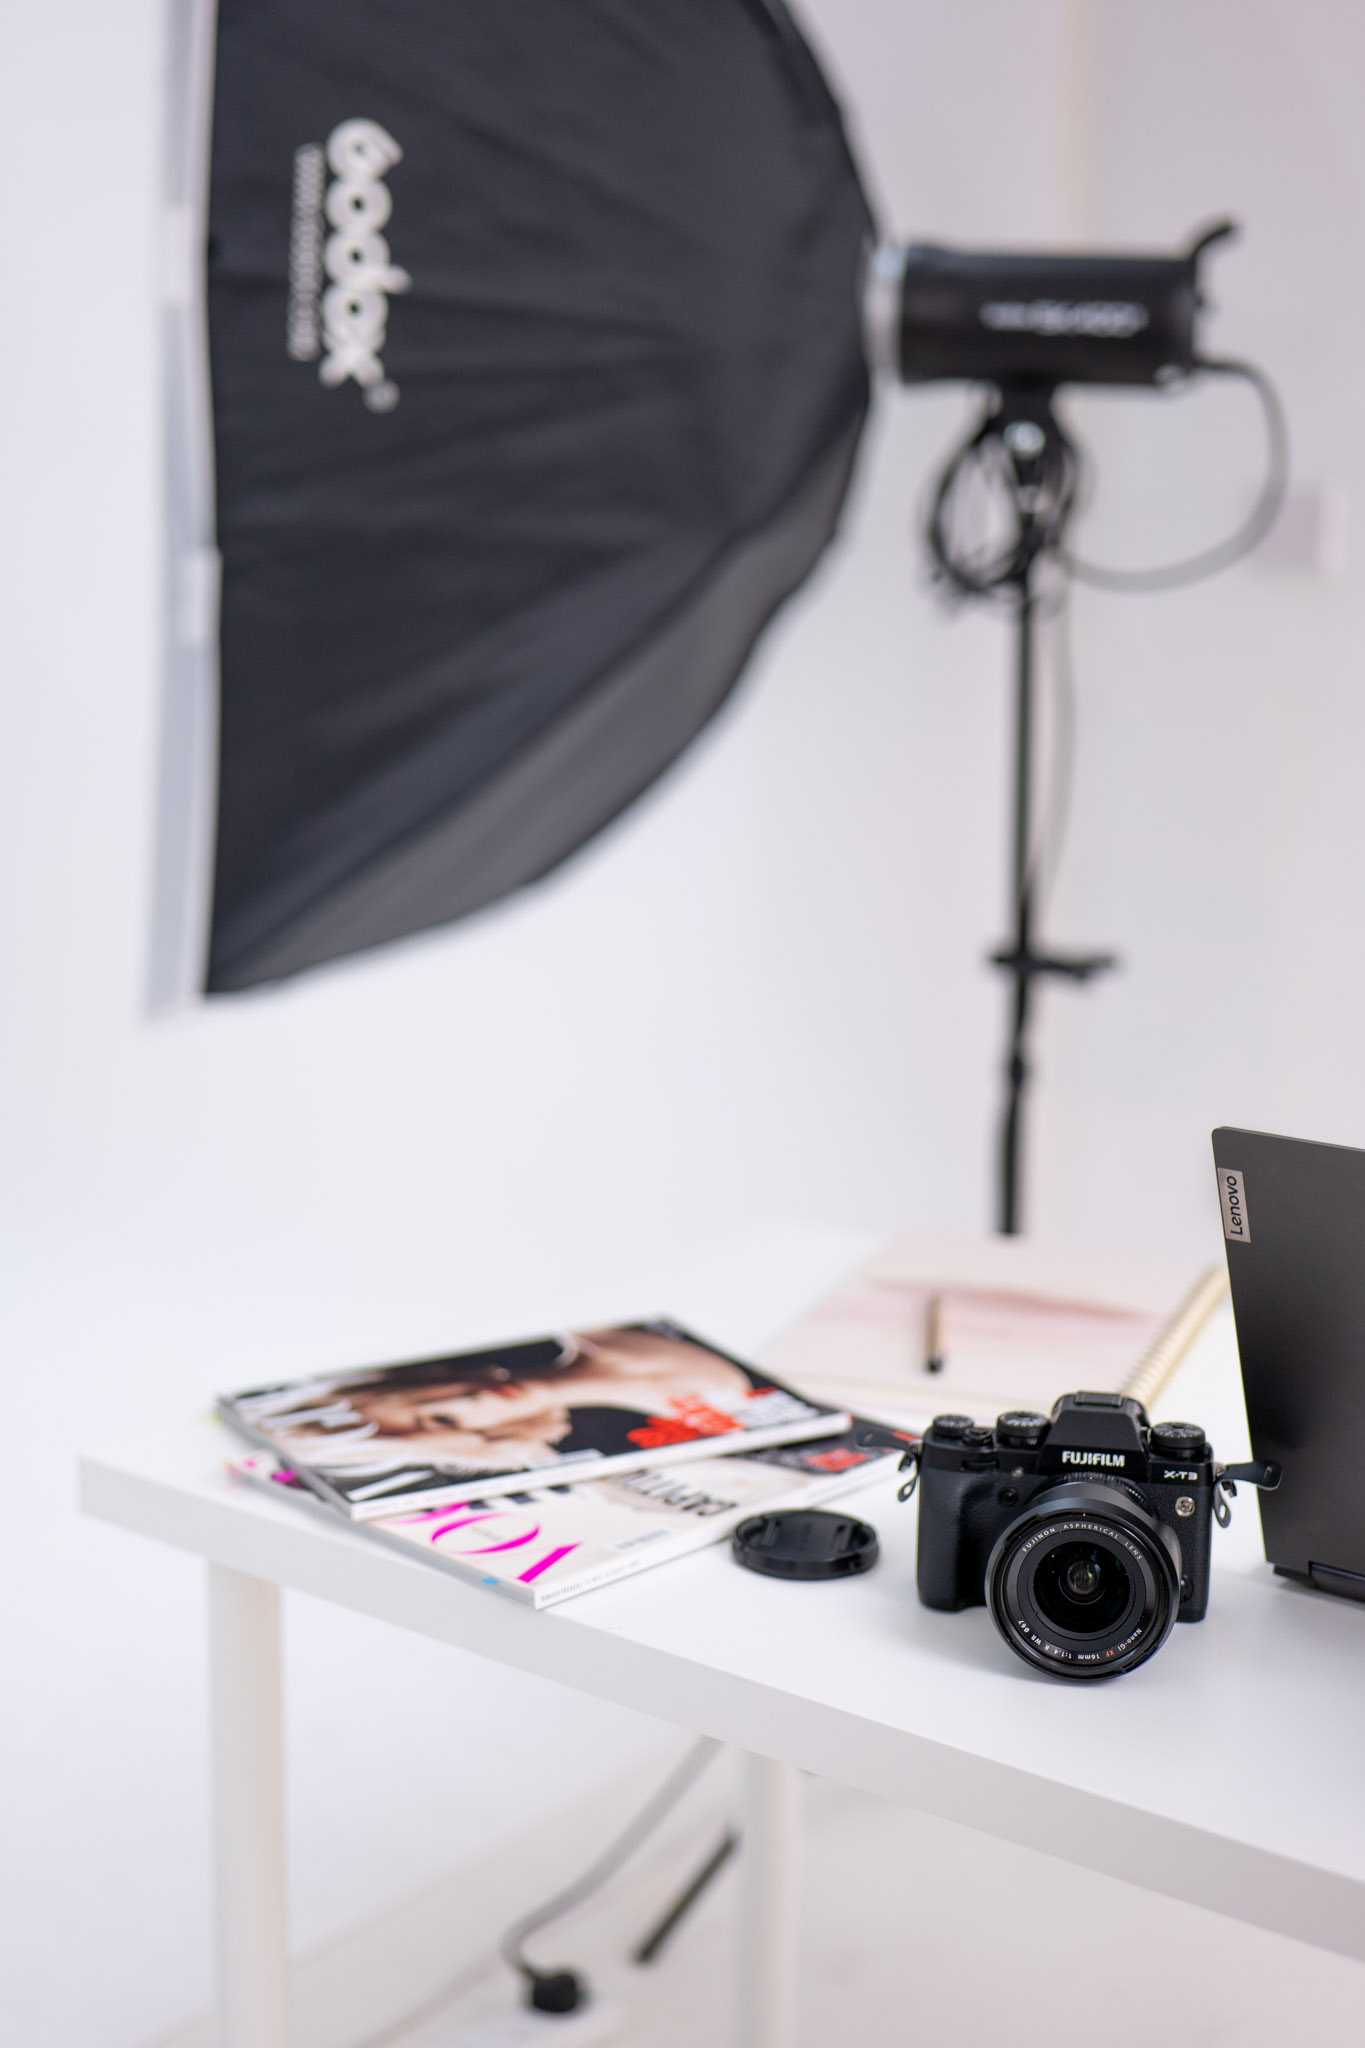 photoshoot bts - camera, laptop and Vogue magazines on the table
